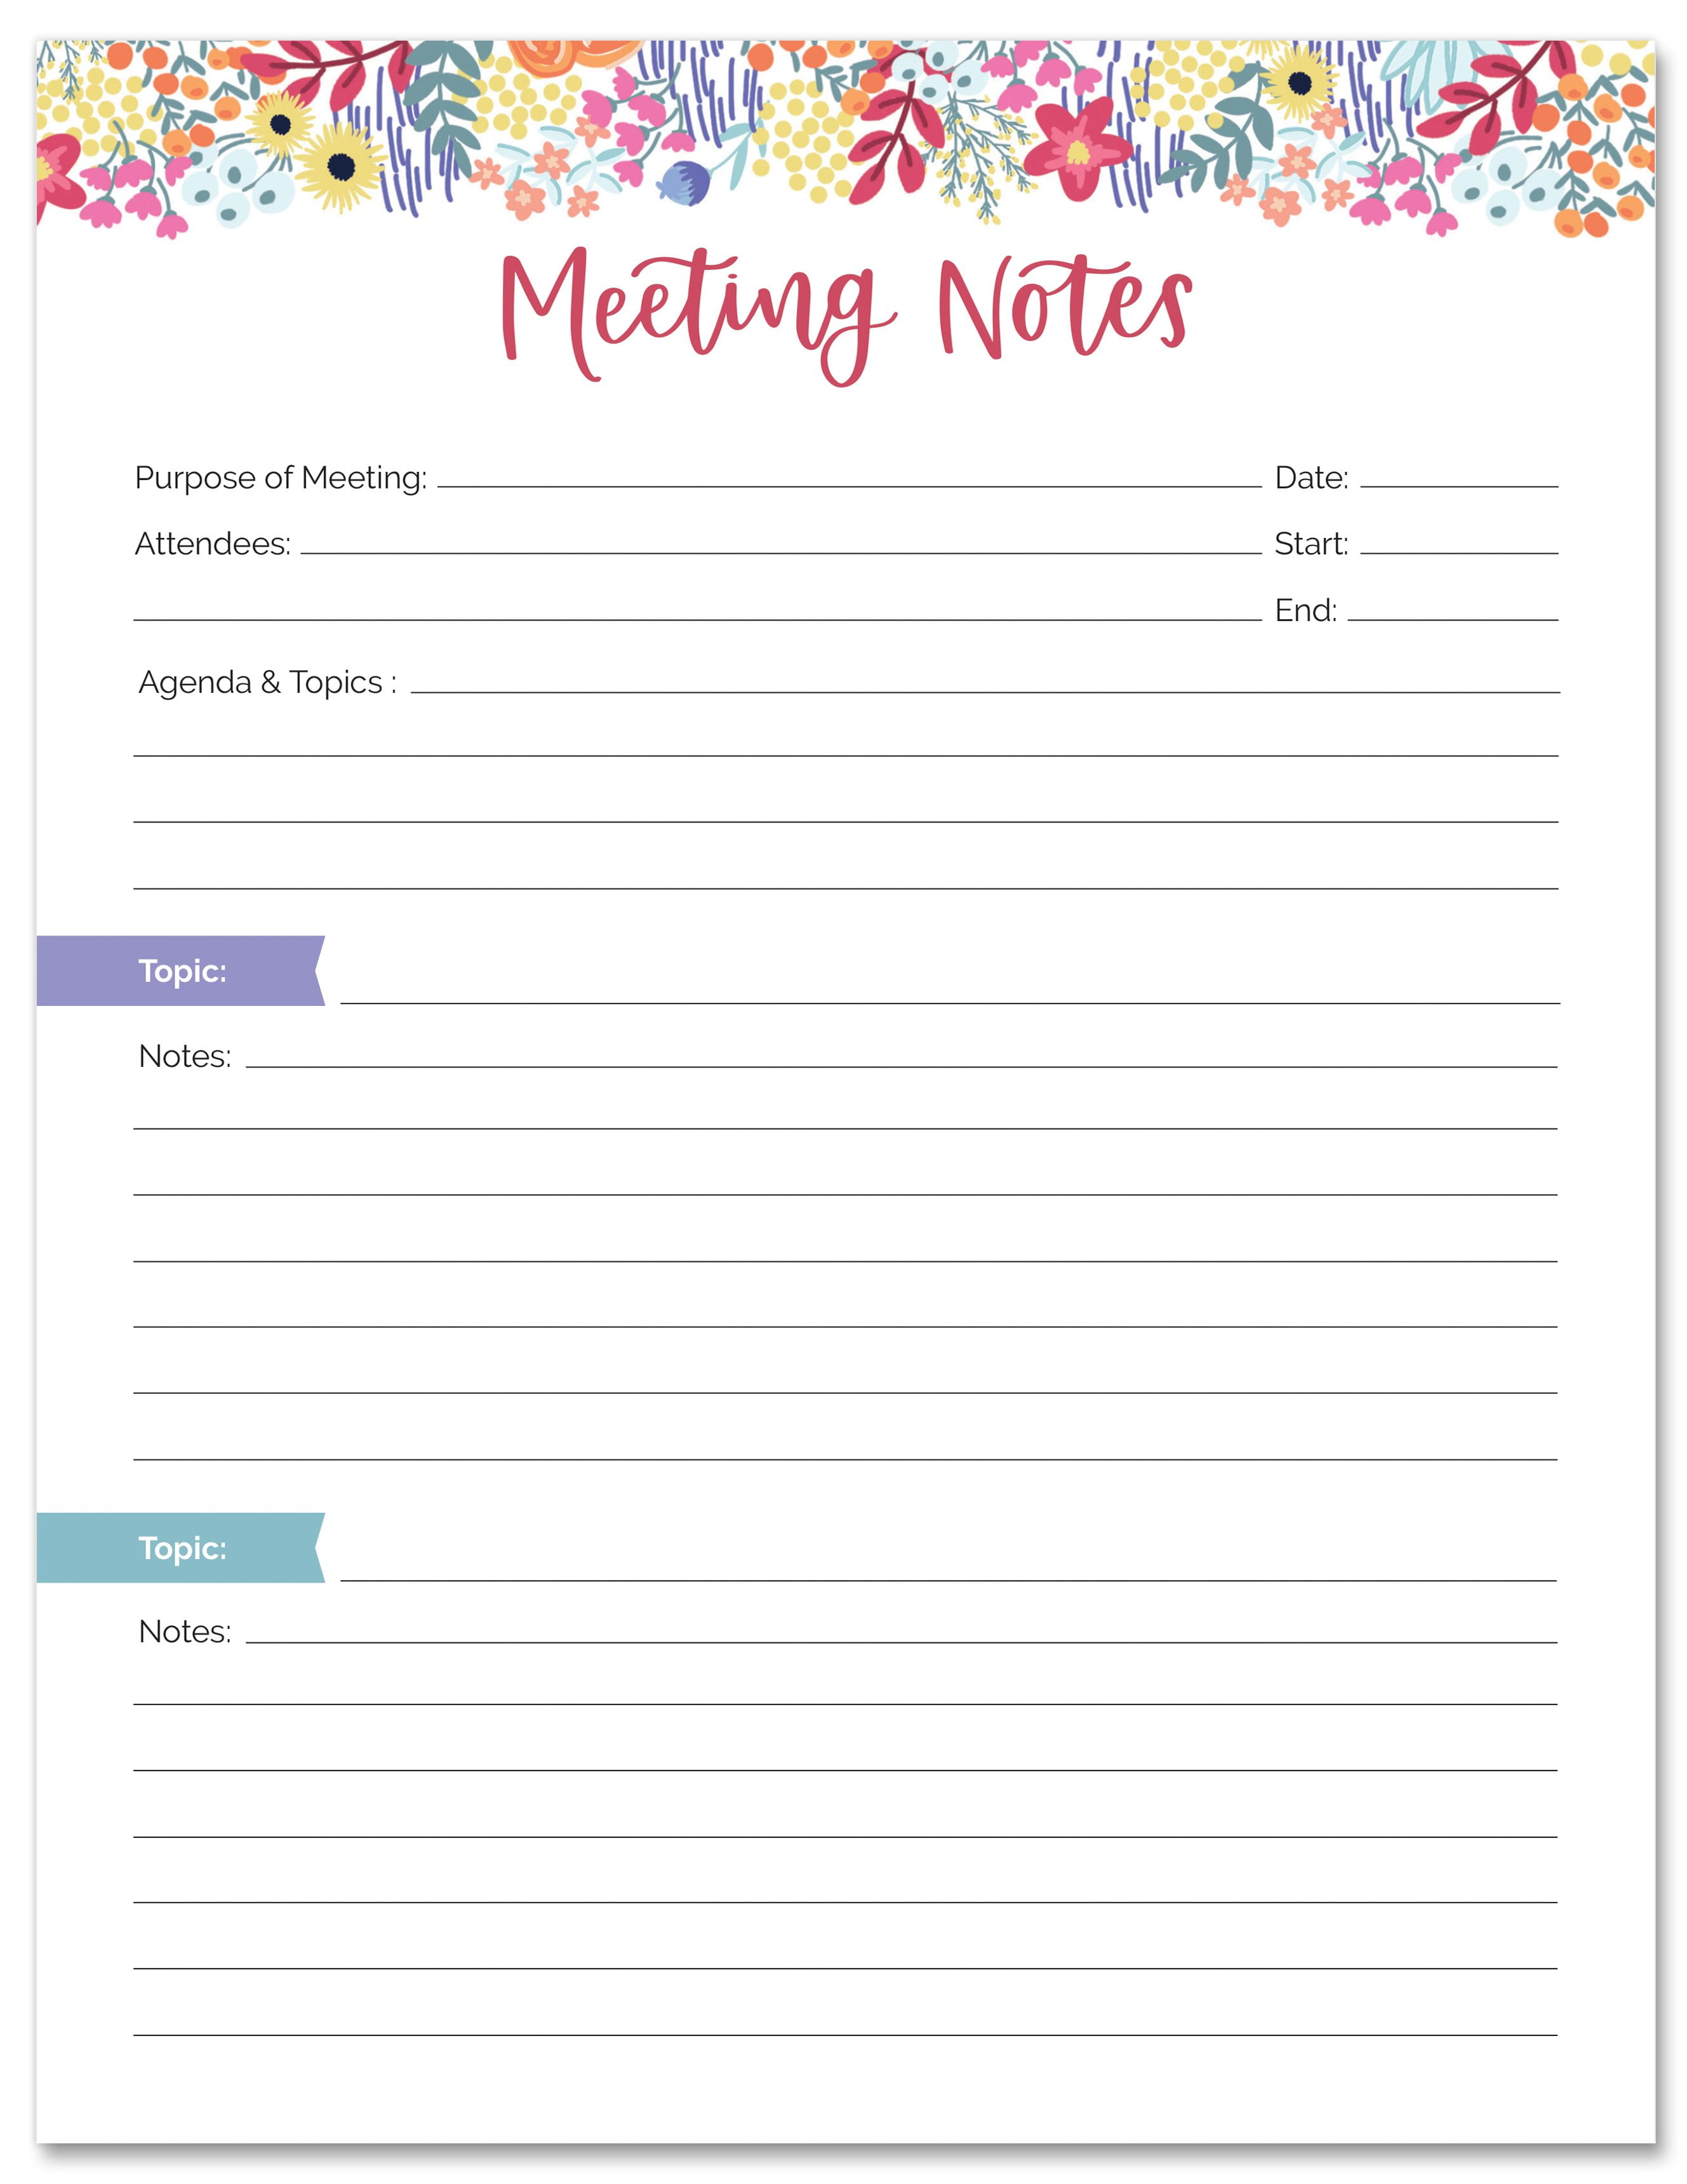 MEETING NOTES PLANNING PAD, 21.21" X 21" - bloom For Meeting Agenda Notes Template